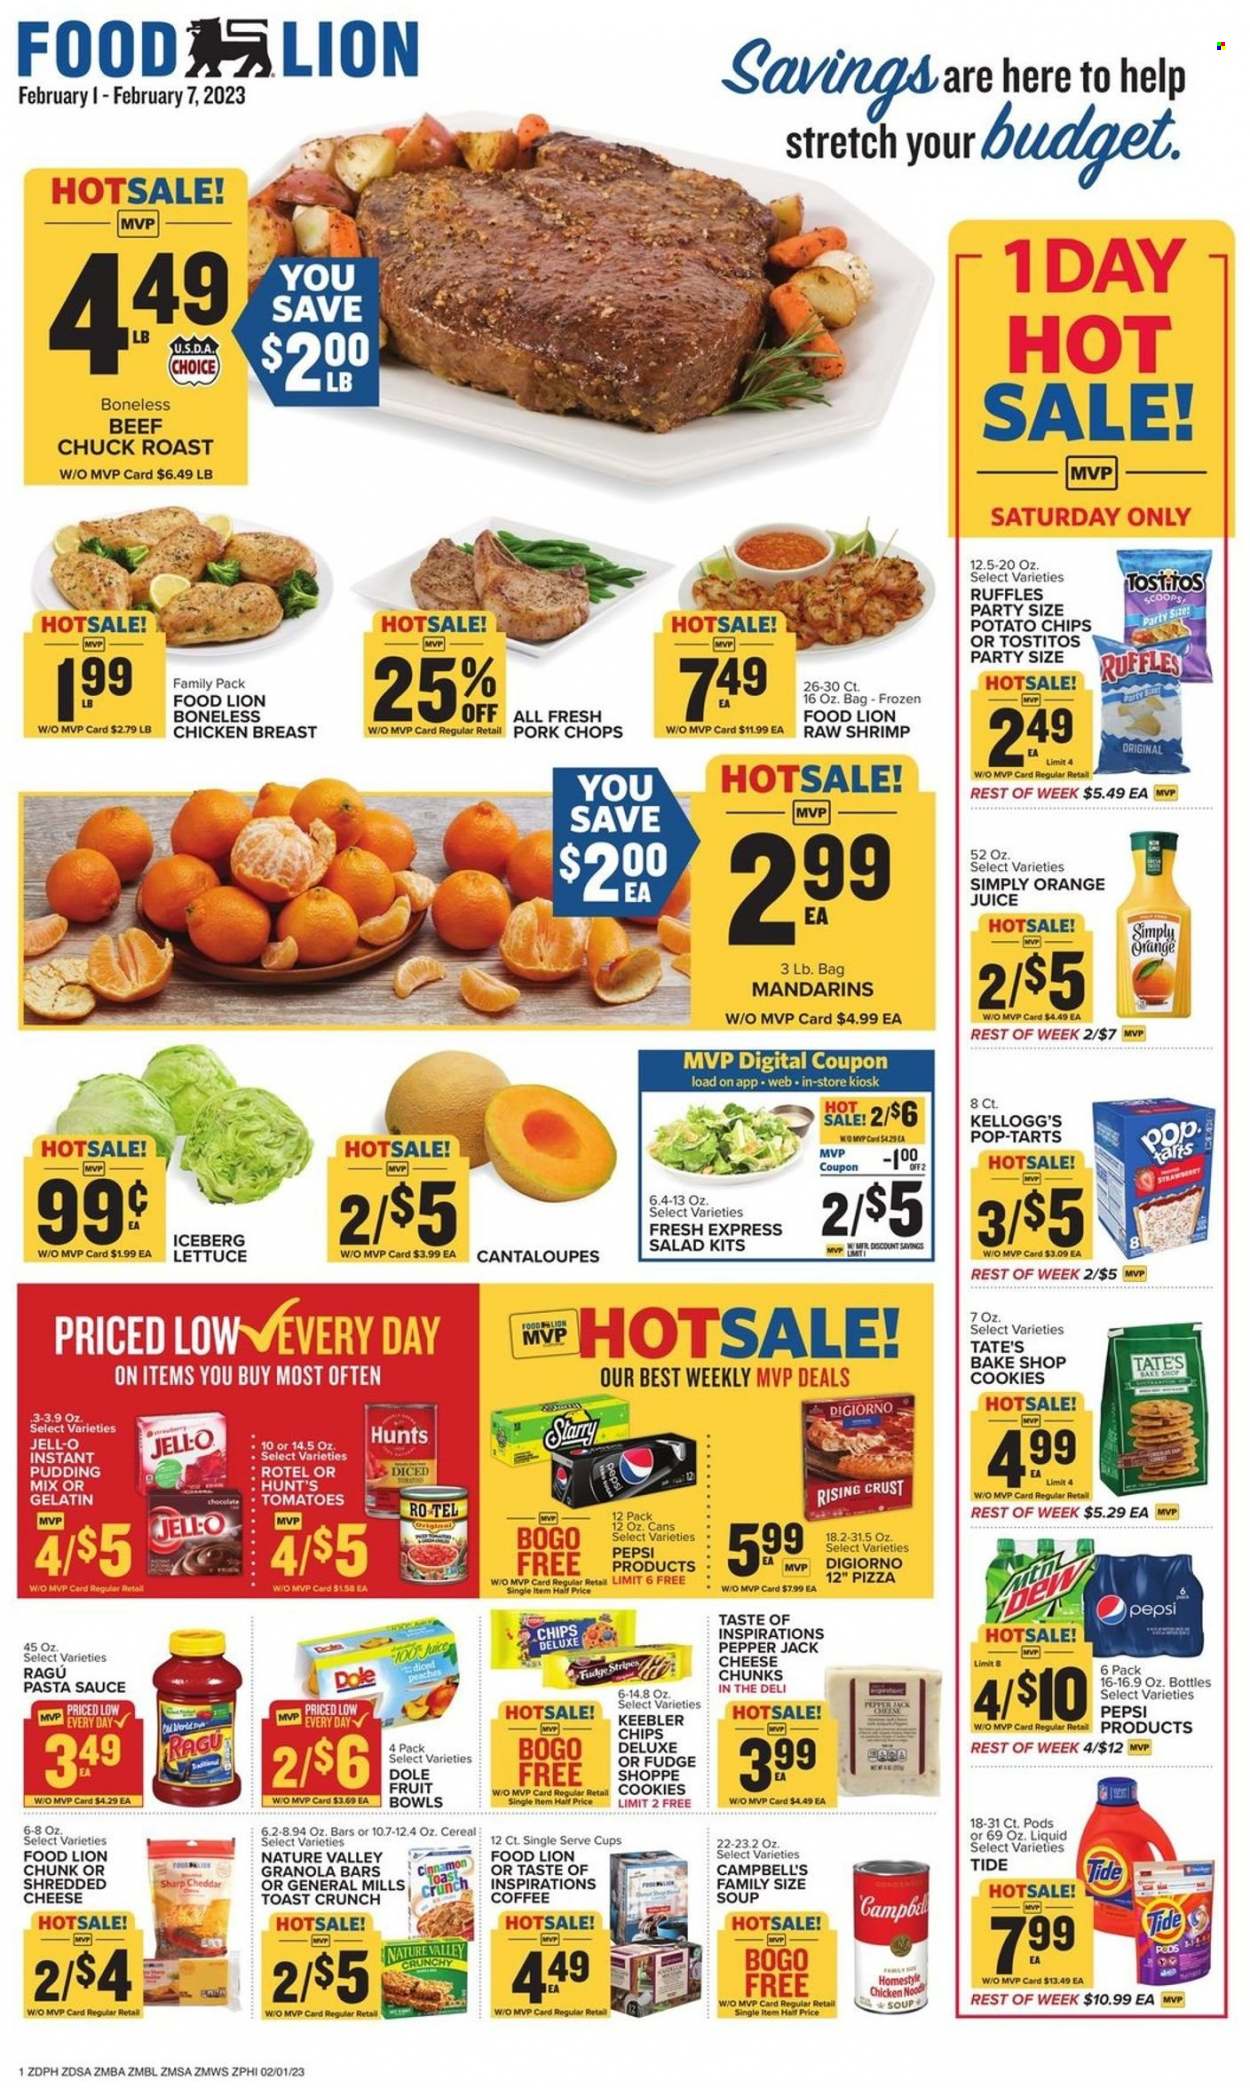 thumbnail - Food Lion Flyer - 02/01/2023 - 02/07/2023 - Sales products - cantaloupe, lettuce, salad, Dole, mandarines, shrimps, Campbell's, pizza, pasta sauce, soup, sauce, ragú pasta, shredded cheese, Pepper Jack cheese, pudding, cookies, fudge, chocolate, Kellogg's, Pop-Tarts, Keebler, potato chips, Ruffles, Tostitos, Jell-O, cereals, granola bar, Nature Valley, ragu, Pepsi, orange juice, juice, coffee, chicken breasts, beef meat, chuck roast, pork chops, pork meat, Tide, cup. Page 1.